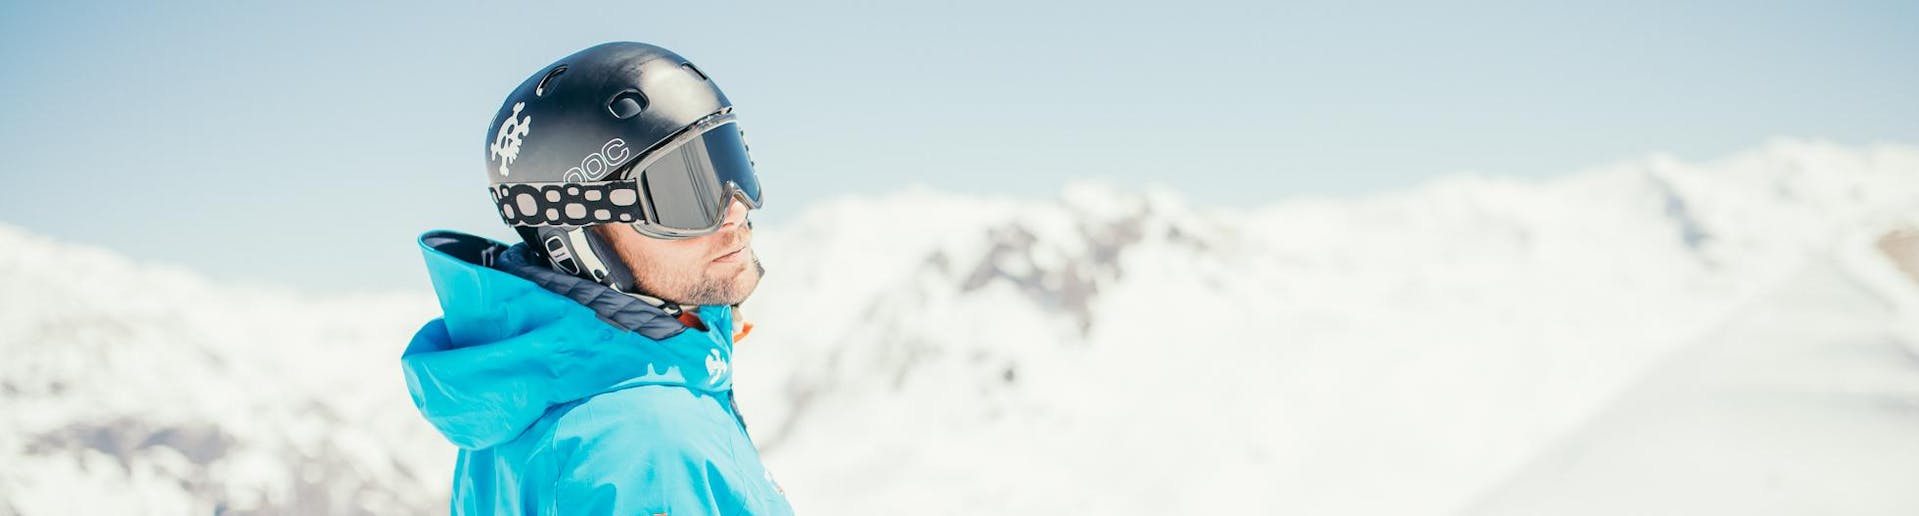 A person is taking Private Snowboarding Lessons - February with our partner Starski Grand Bornand.